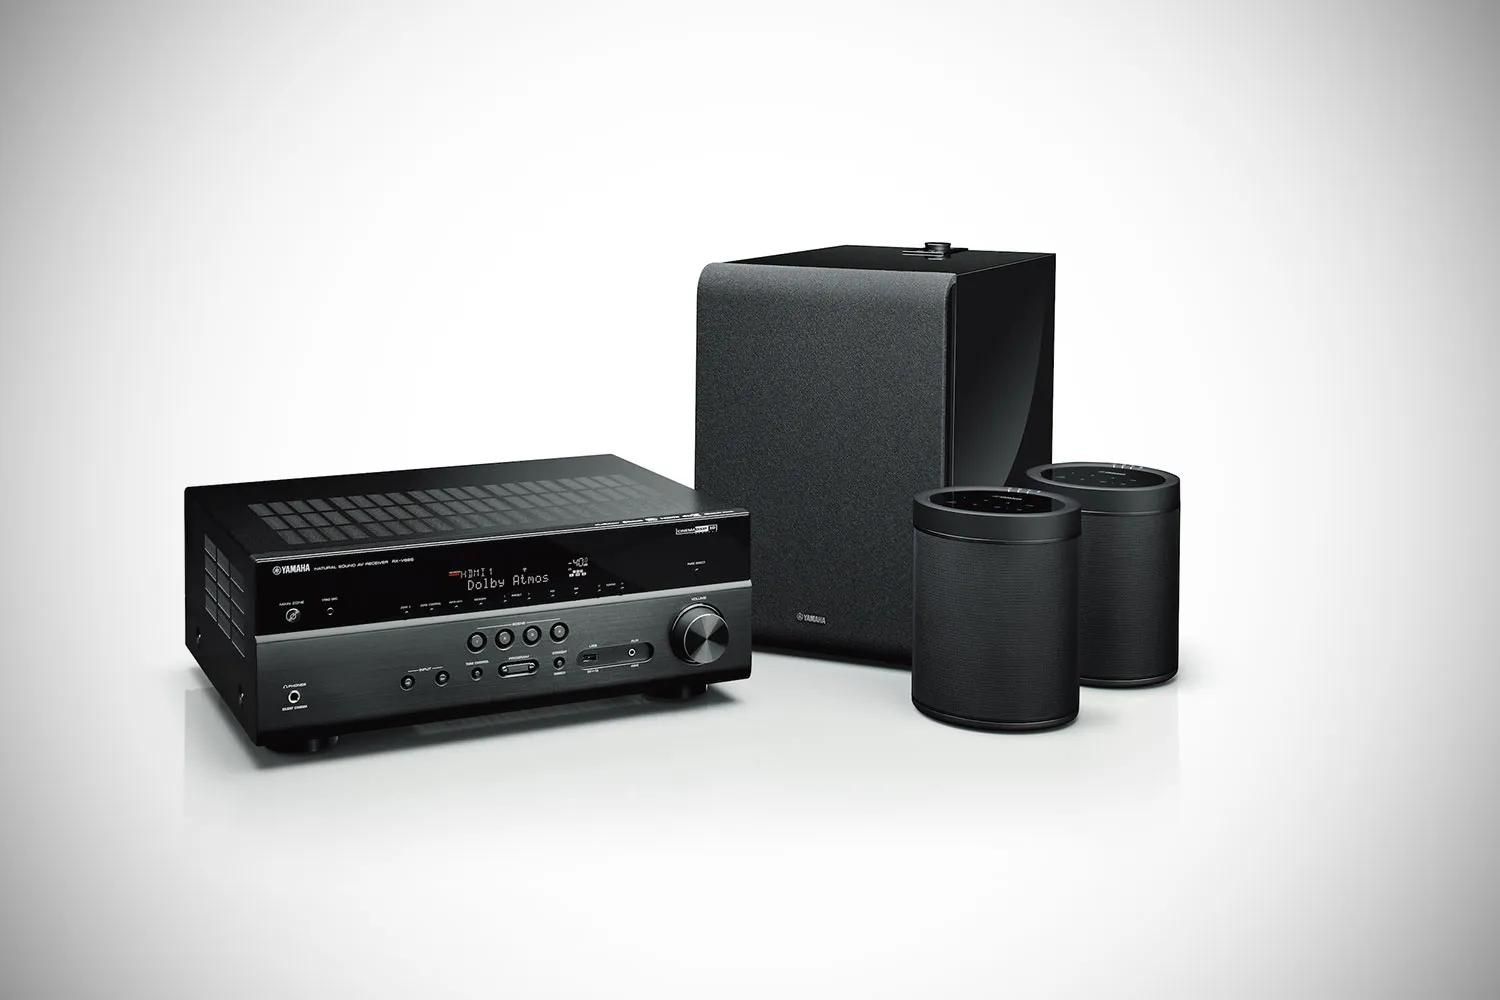 yamaha-music-cast-network-av-receiver-how-to-add-wired-speakers-in-a-different-room